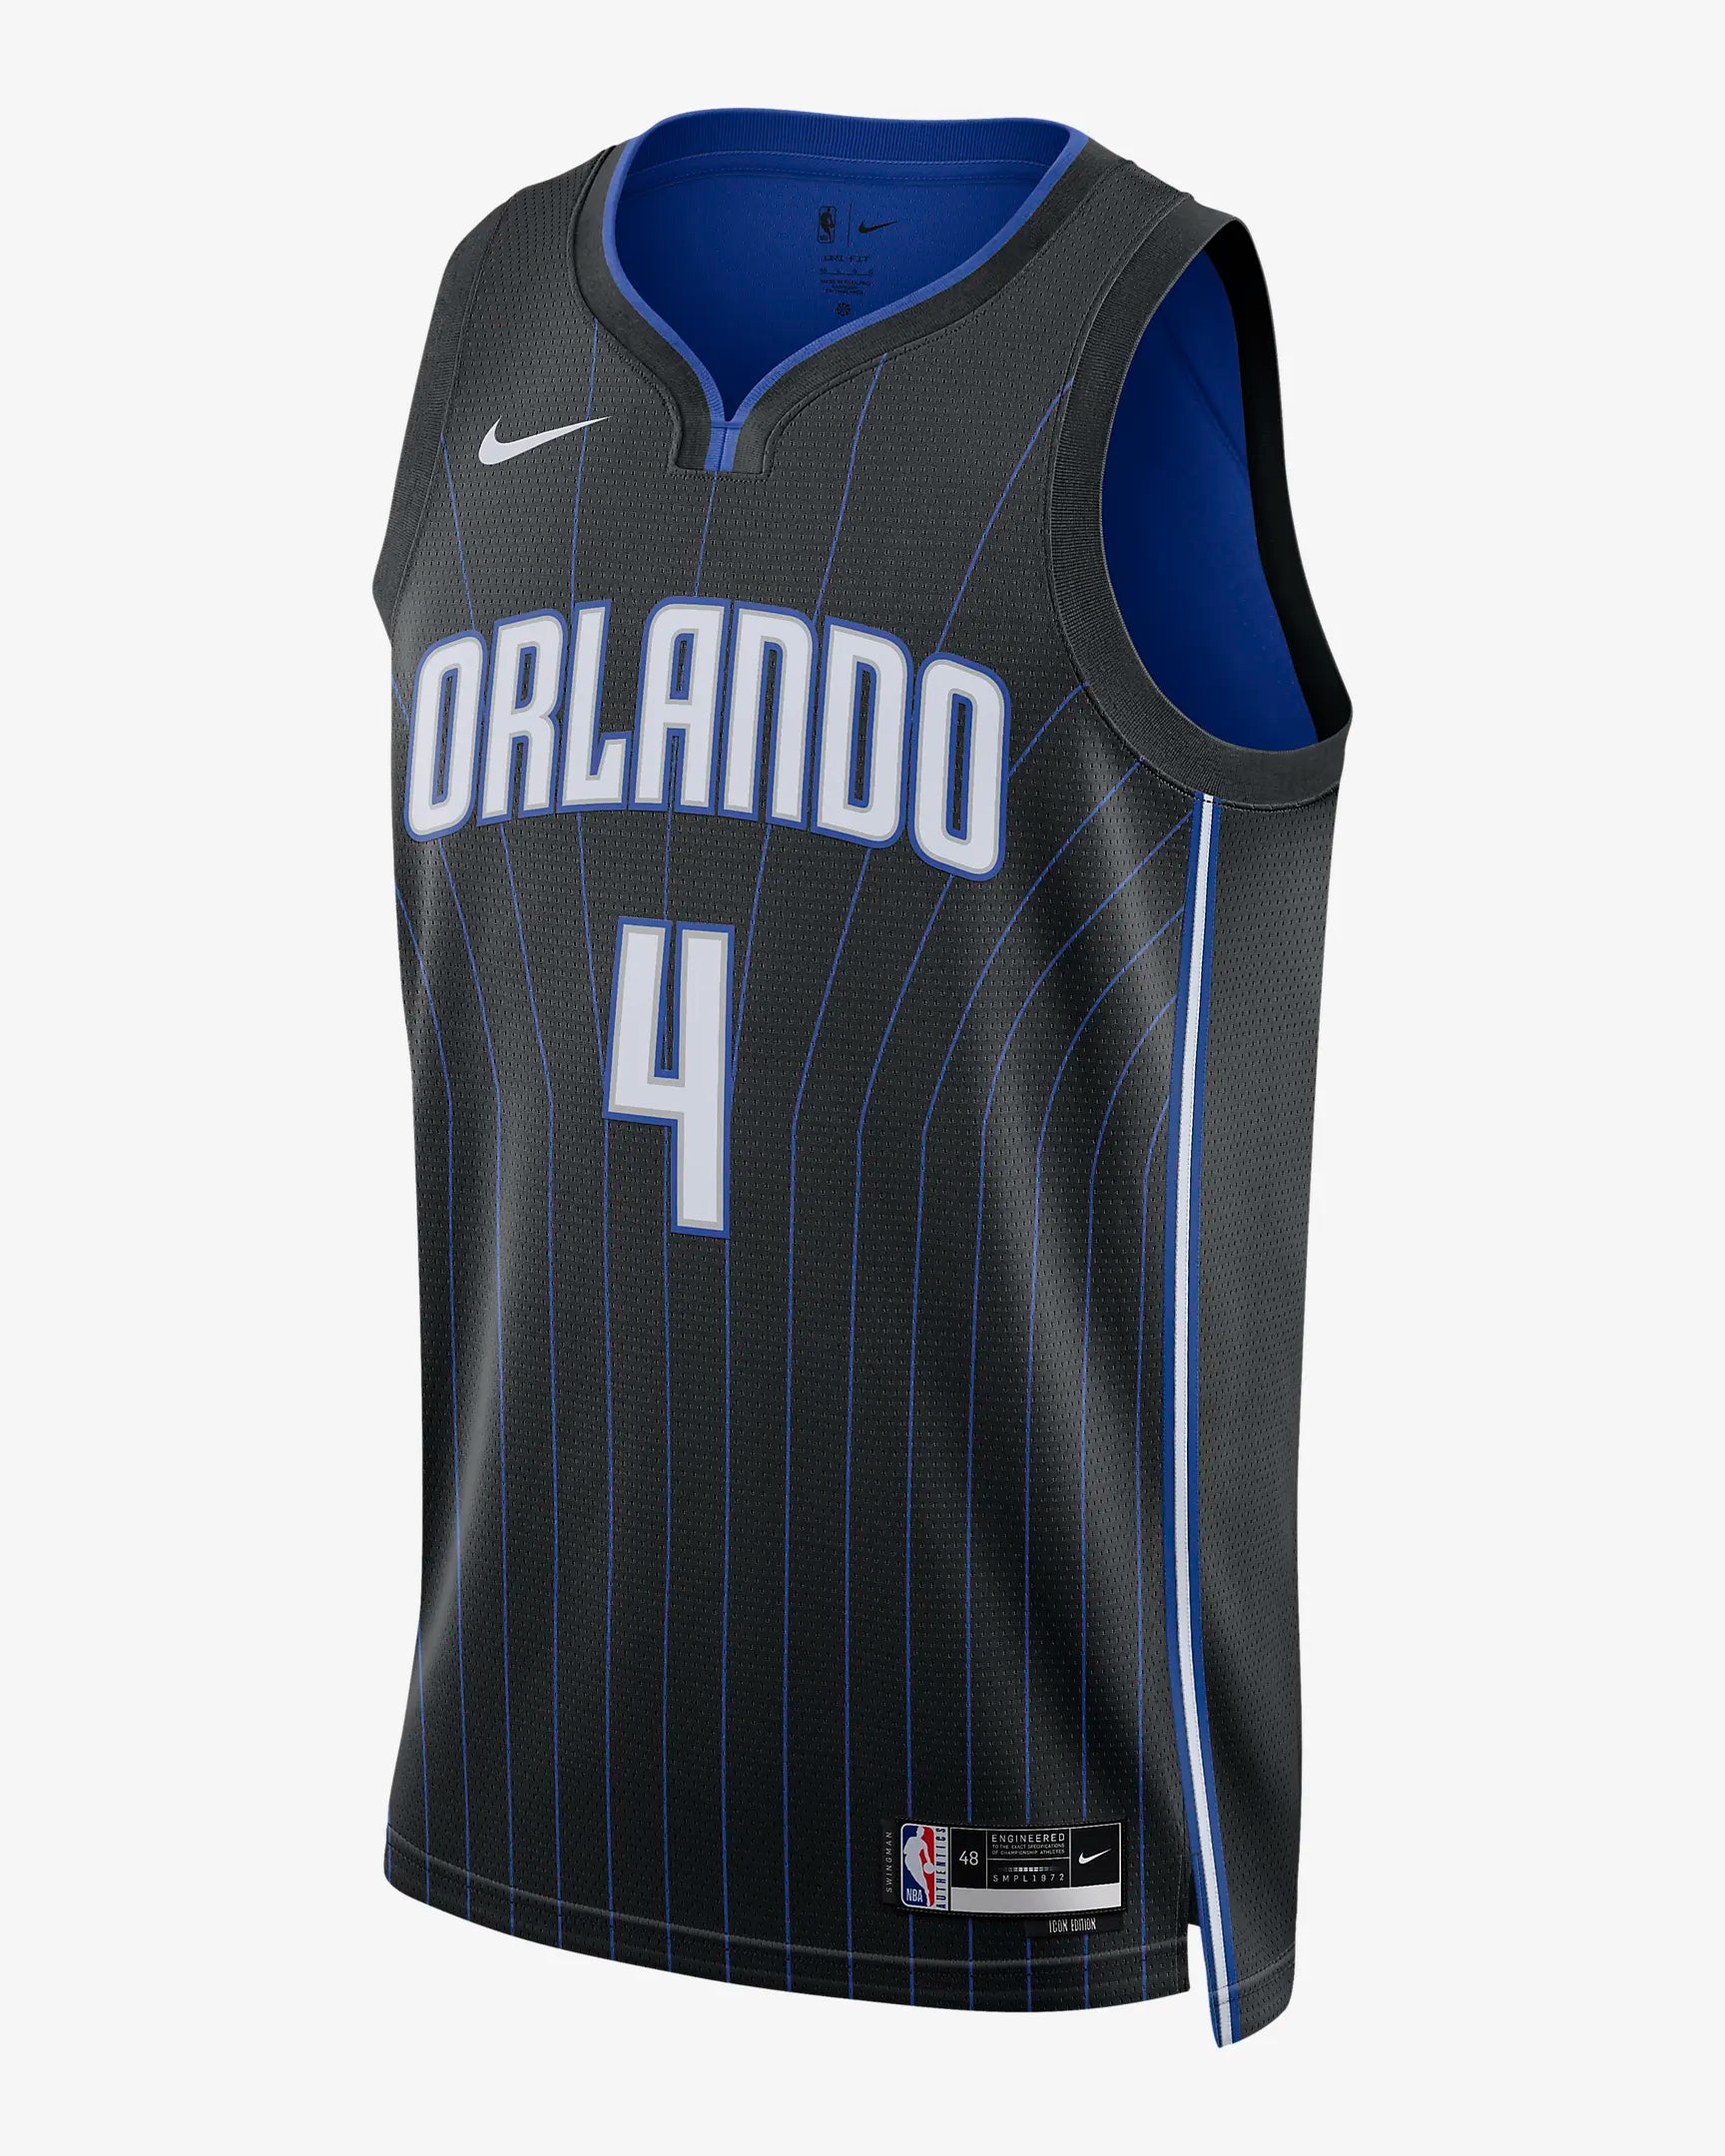 Where to buy the 2022-23 City Edition jersey for your favorite NBA